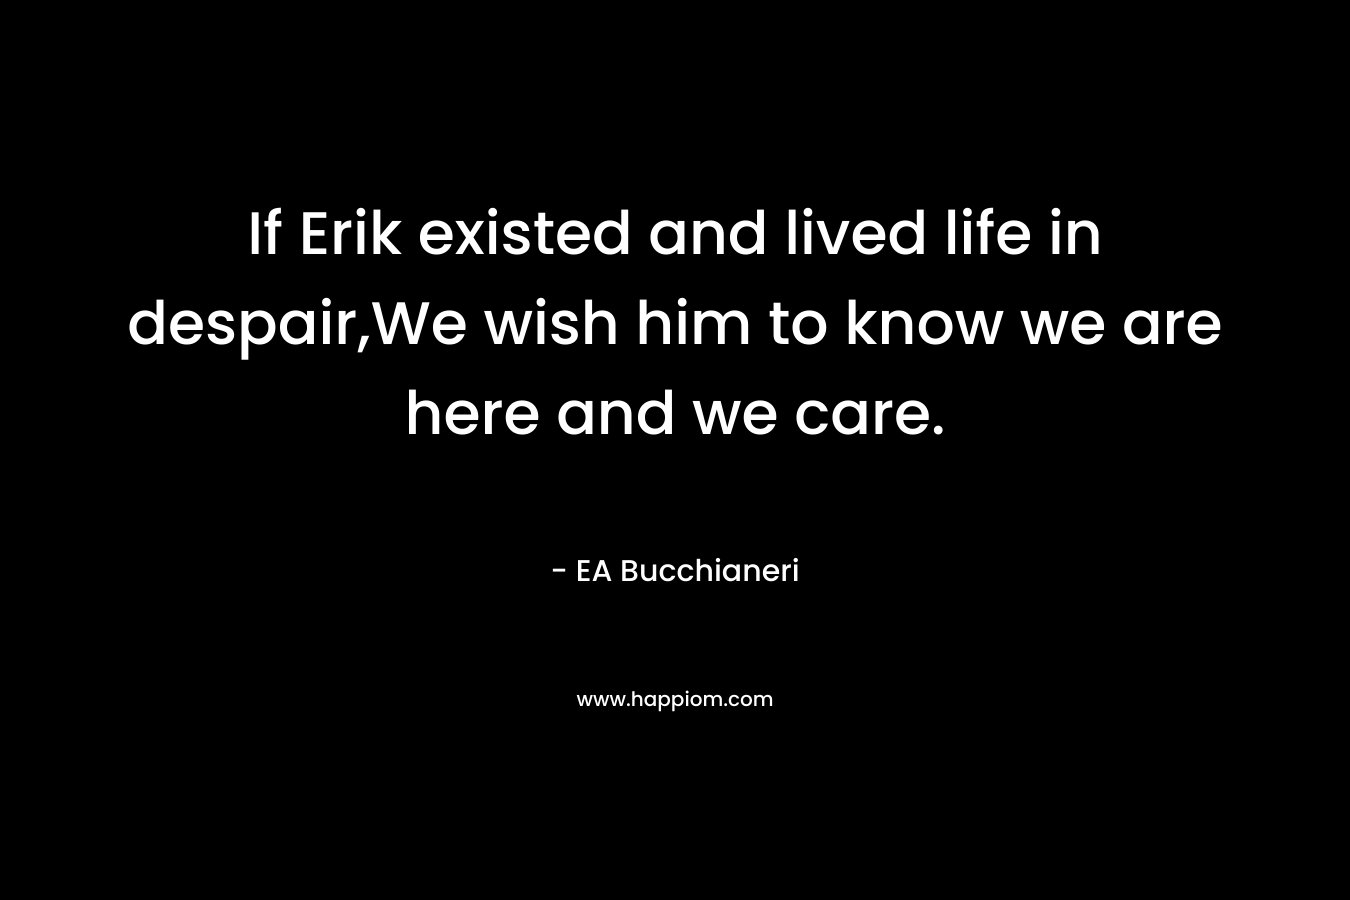 If Erik existed and lived life in despair,We wish him to know we are here and we care.